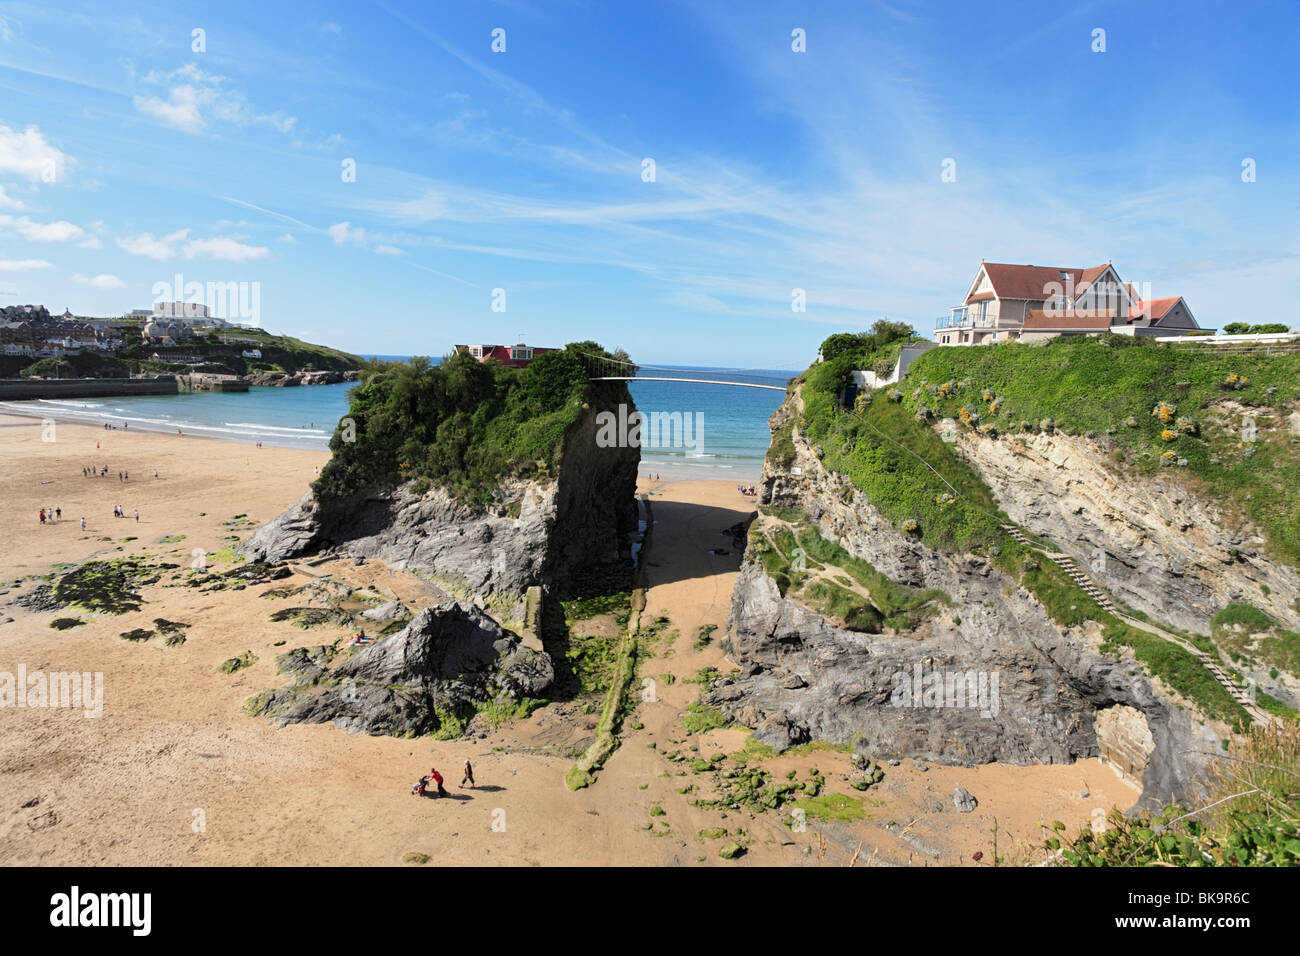 Plage de Towan, Newquay, Cornwall, Angleterre, Royaume-Uni Banque D'Images